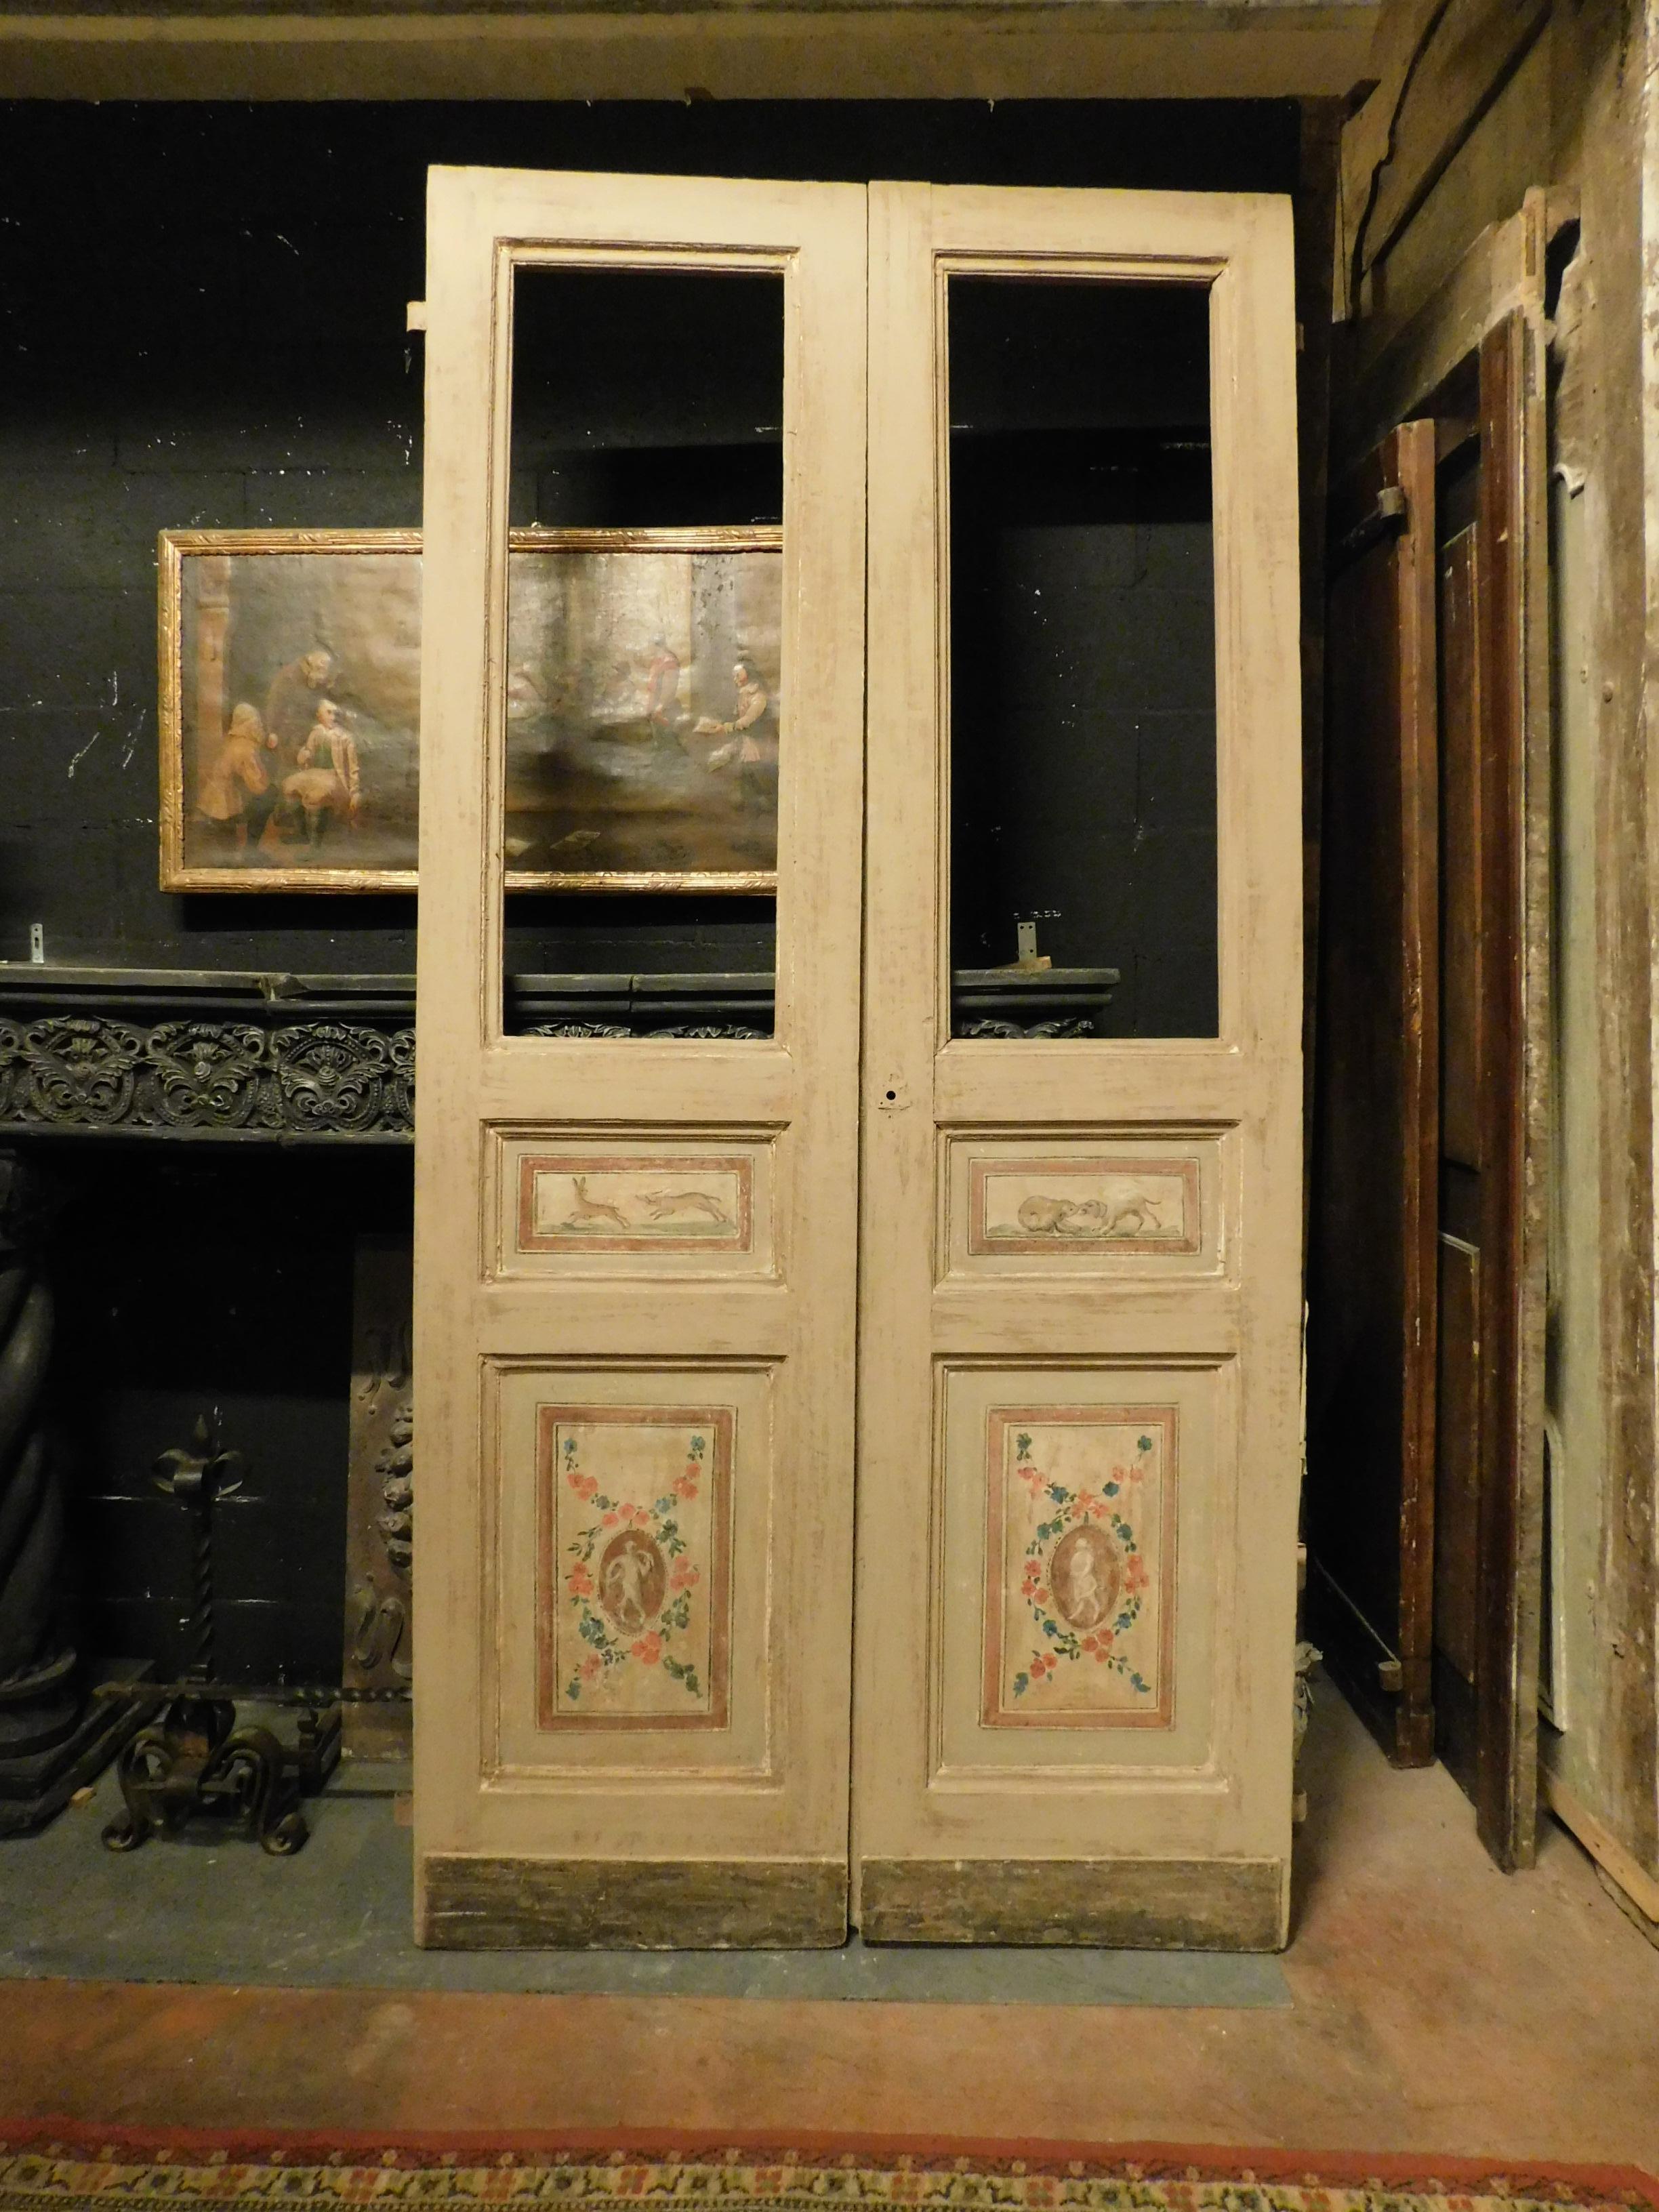 Antique interior door with glass, double-leaf with carved panels and original paintings, painted and finished on both sides, beautiful patina of the time, hand-built in the late 18th century for a home in Italy.
It has original and beautiful